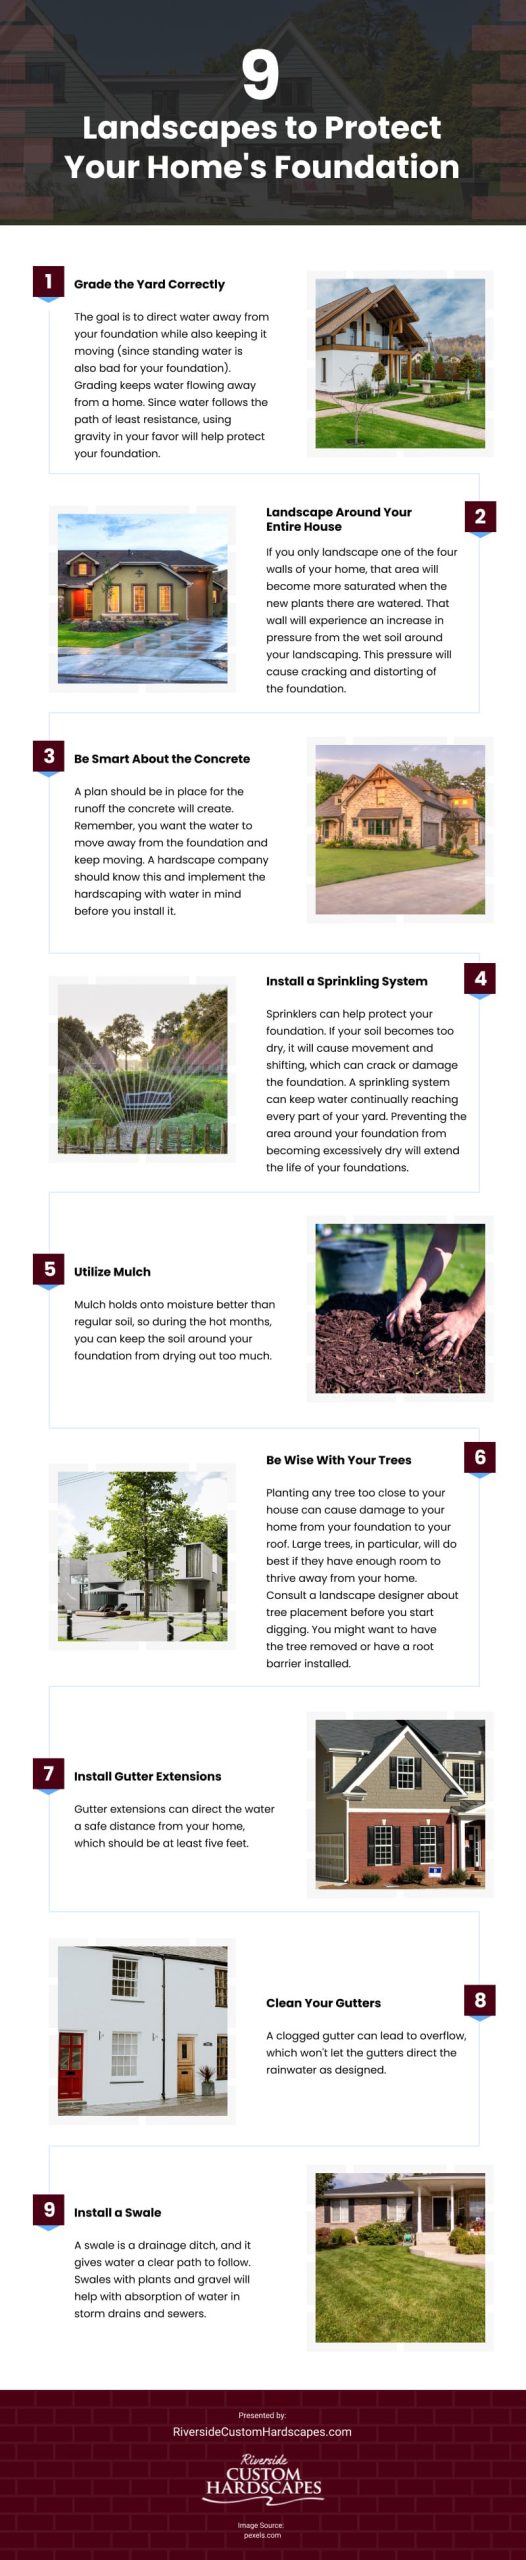 9 Landscapes to Protect Your Home’s Foundation Infographic